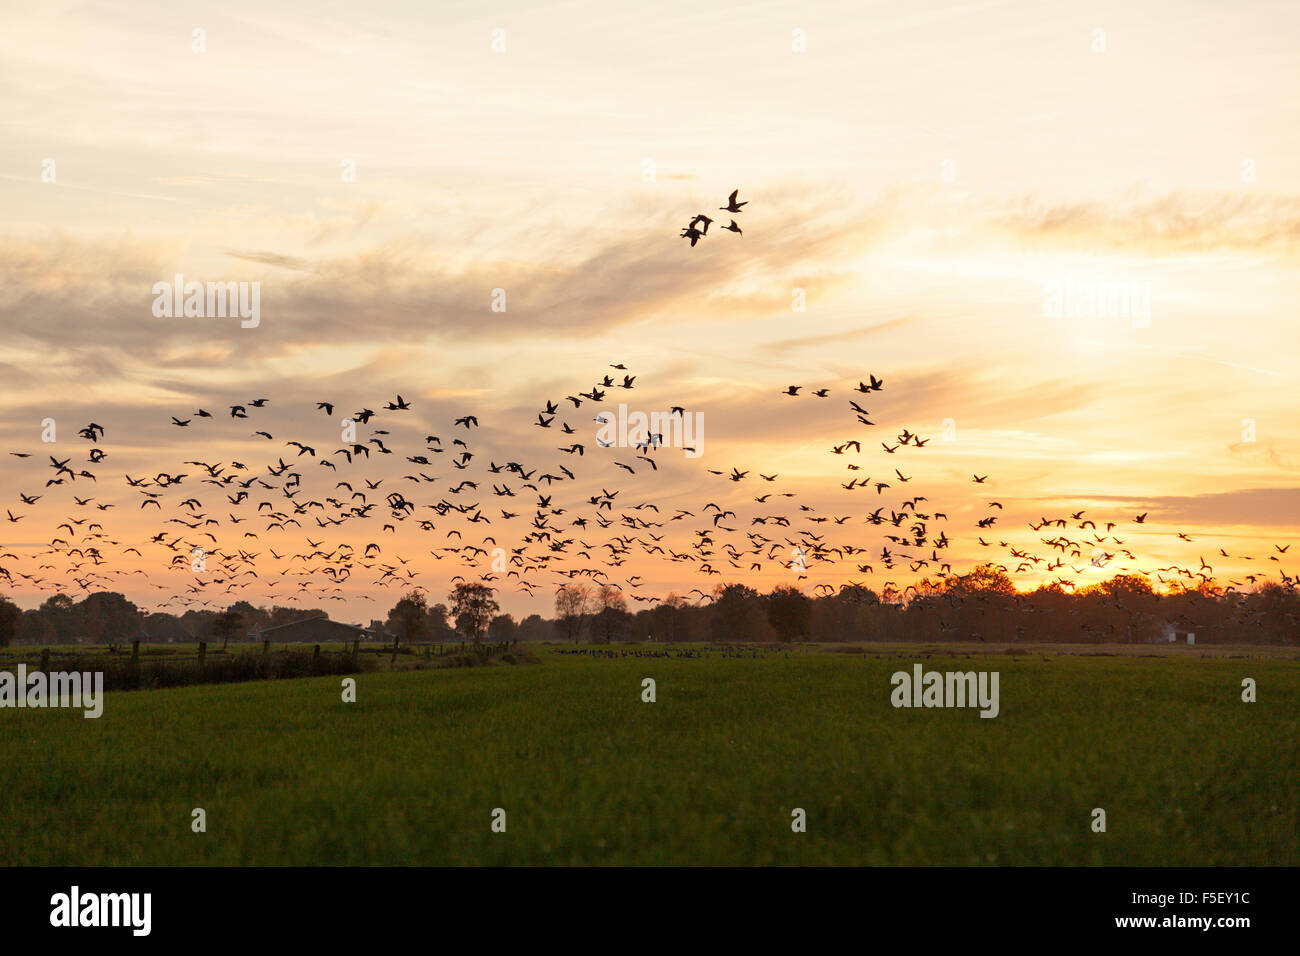 Flock of wild geese flying in sunset Stock Photo